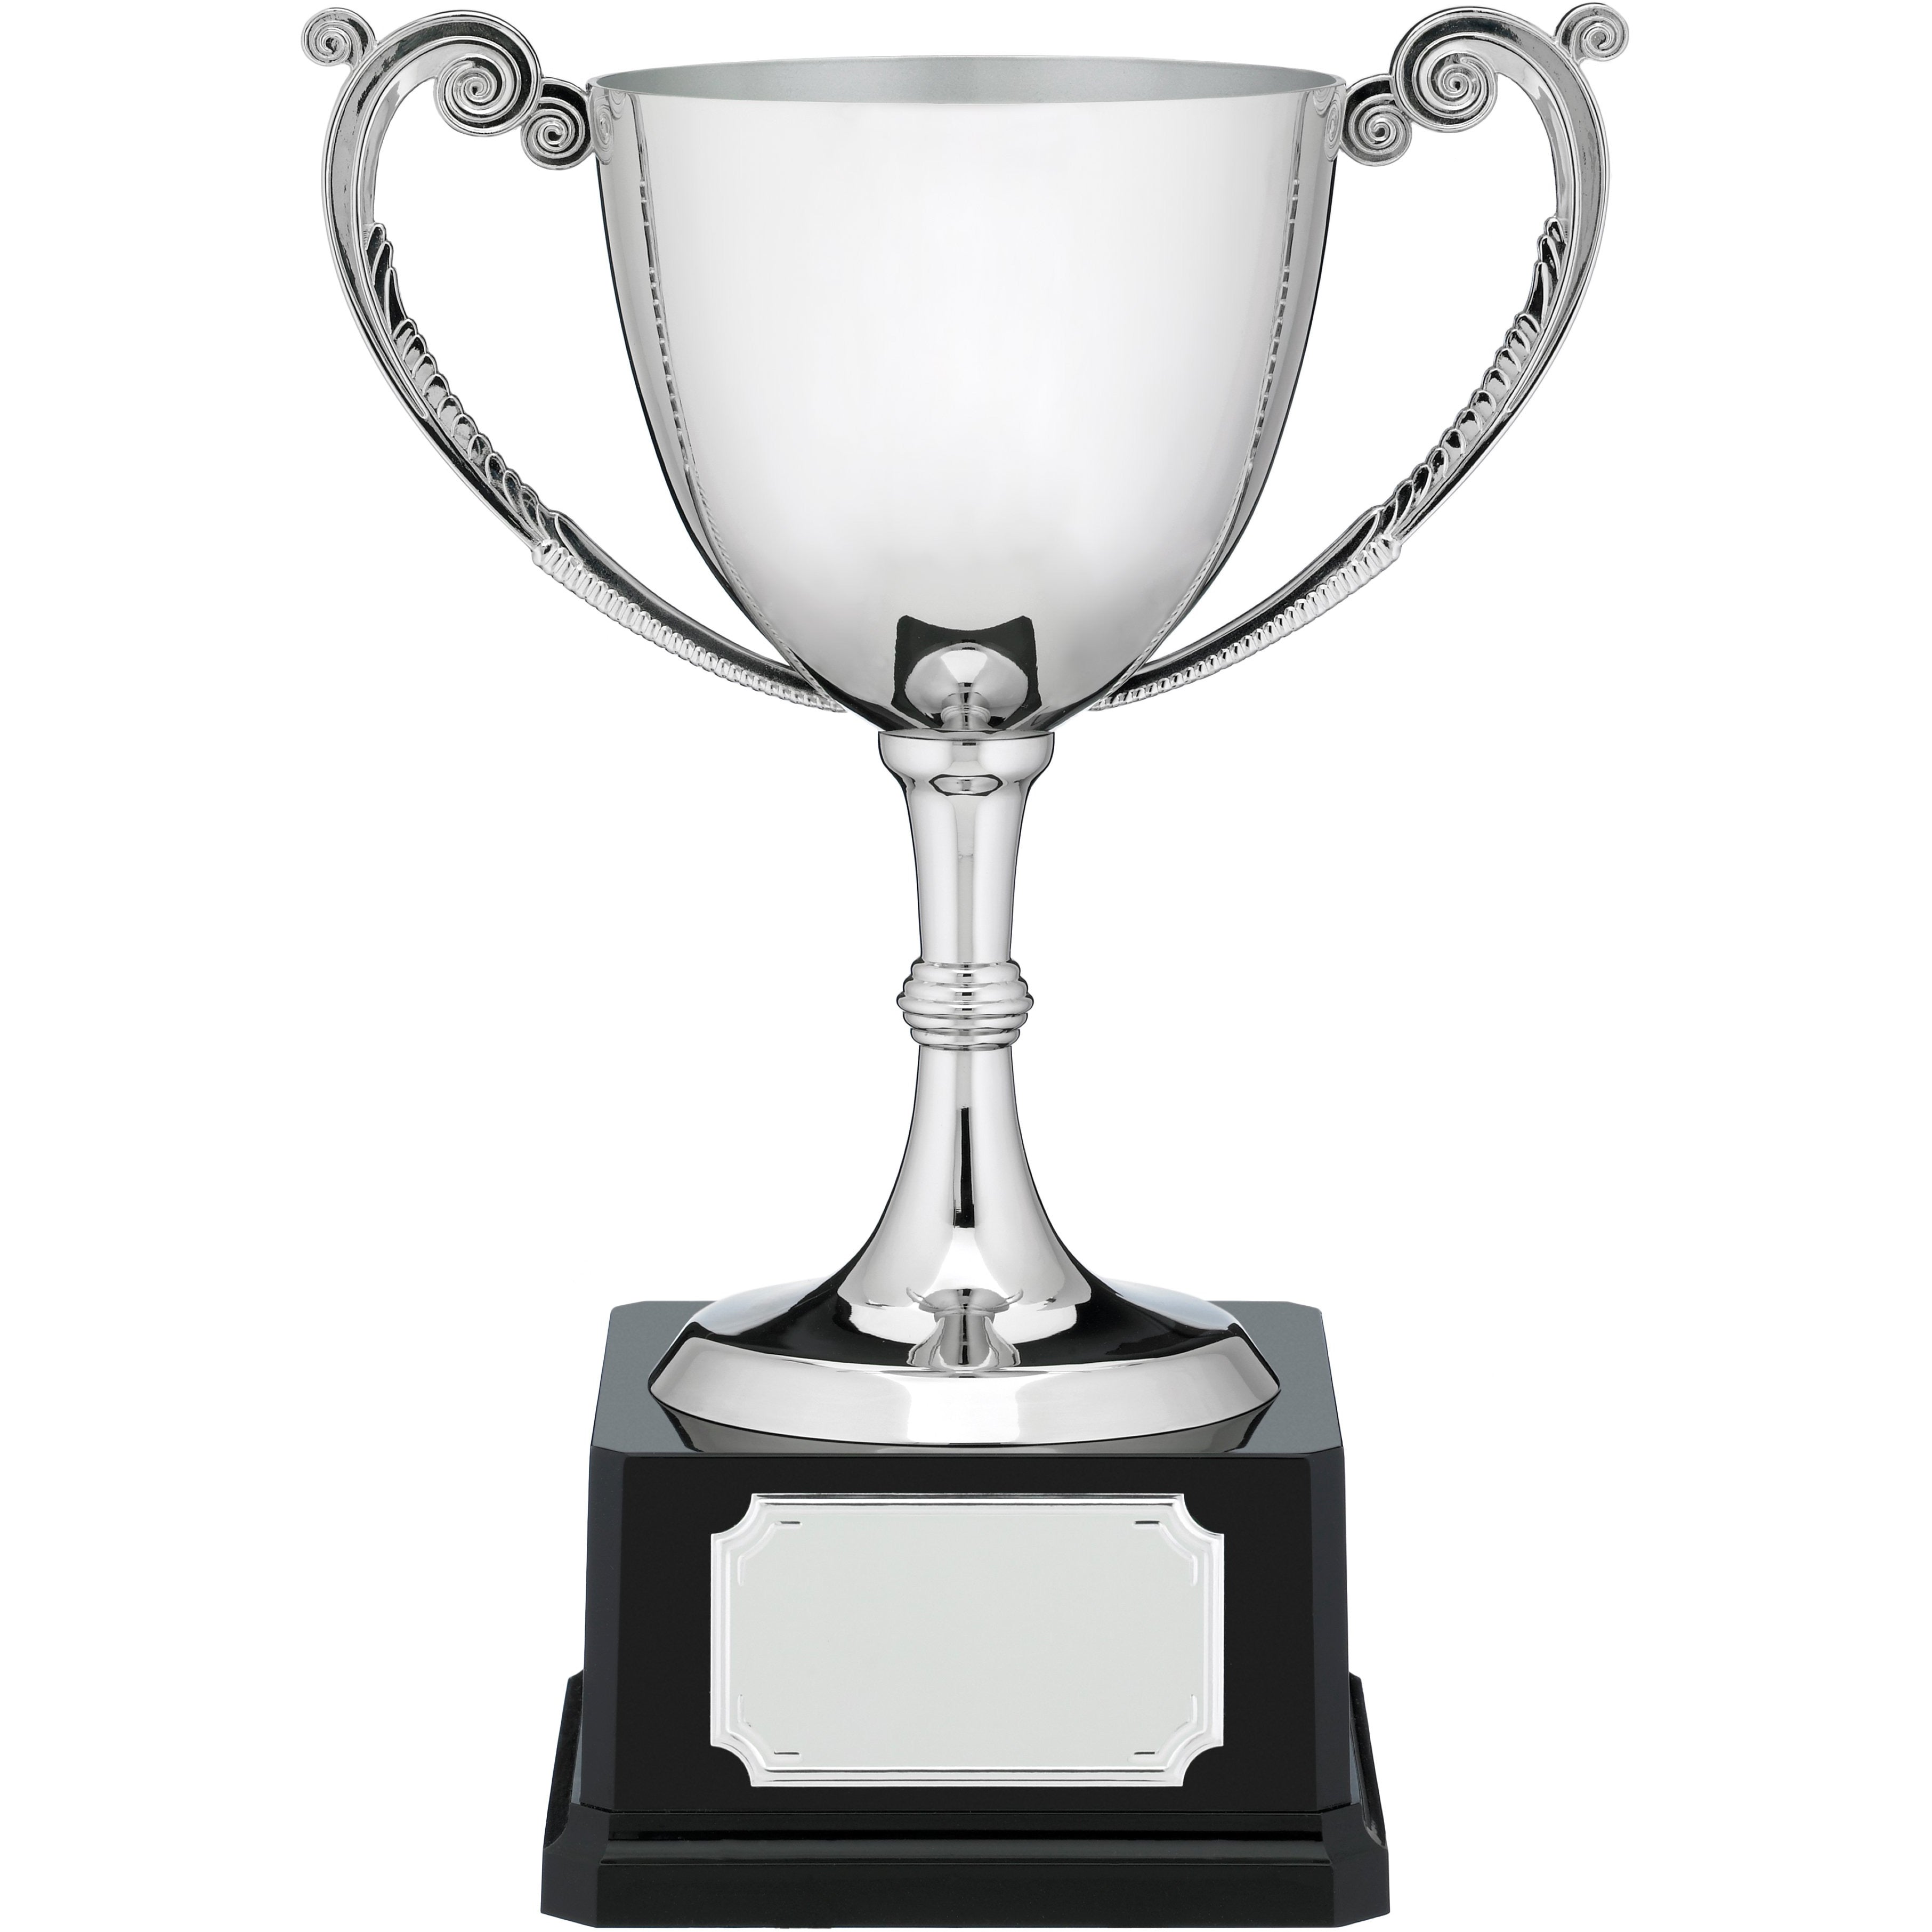 Nickel Plated Trophy Cup - Ornate Handles on Square Base